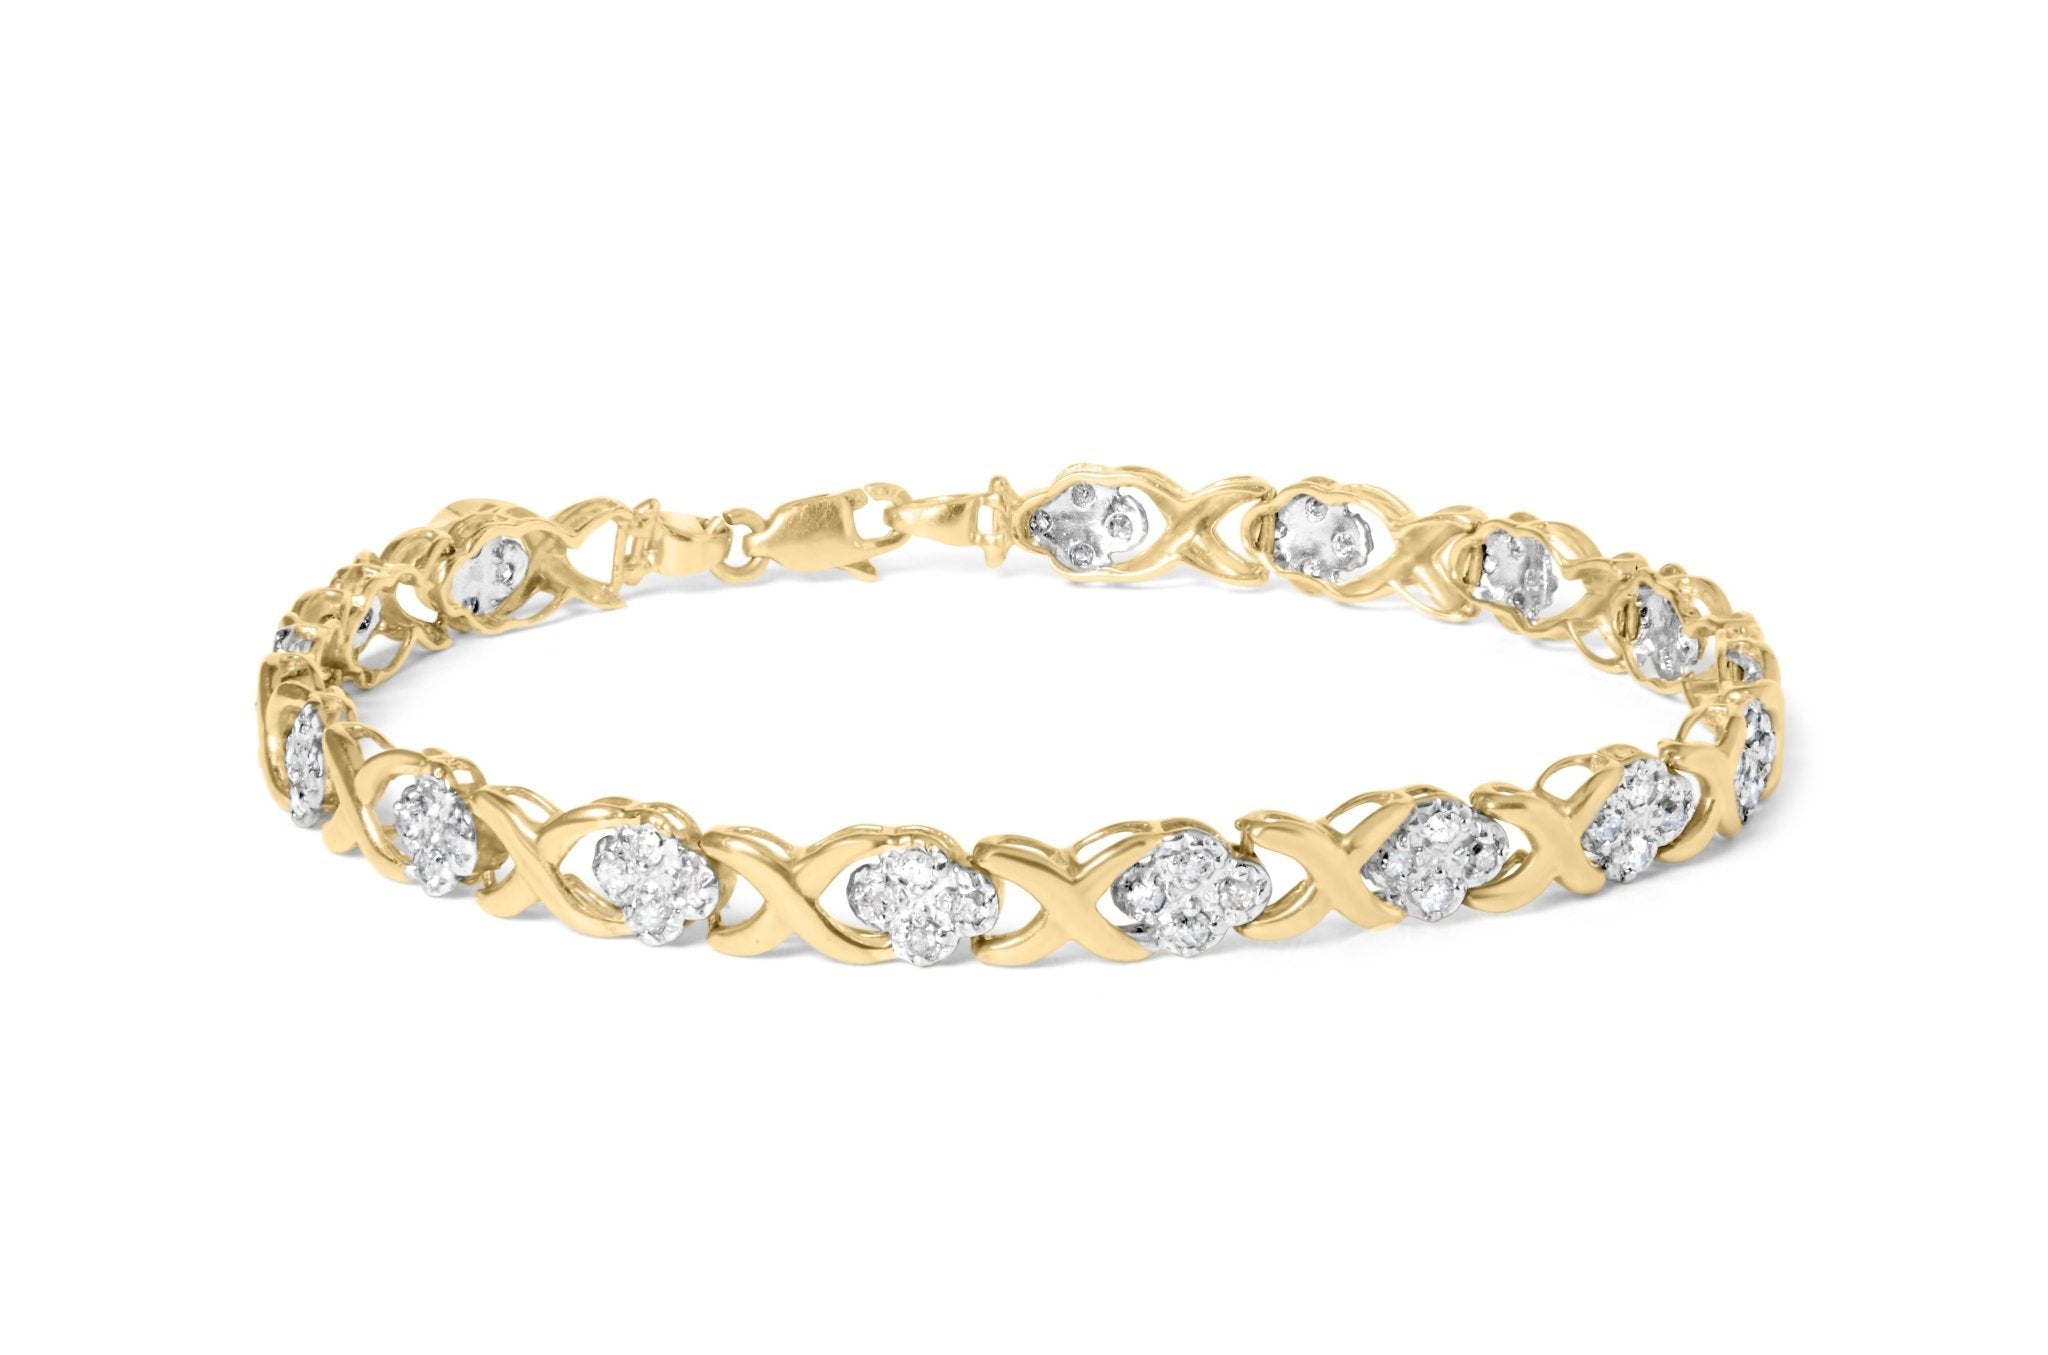 10K Yellow Gold Over .925 Sterling Silver 1.0 Cttw Diamond Cluster X Link Tennis Link Bracelet (H-I Color, I3 Clarity) - 7